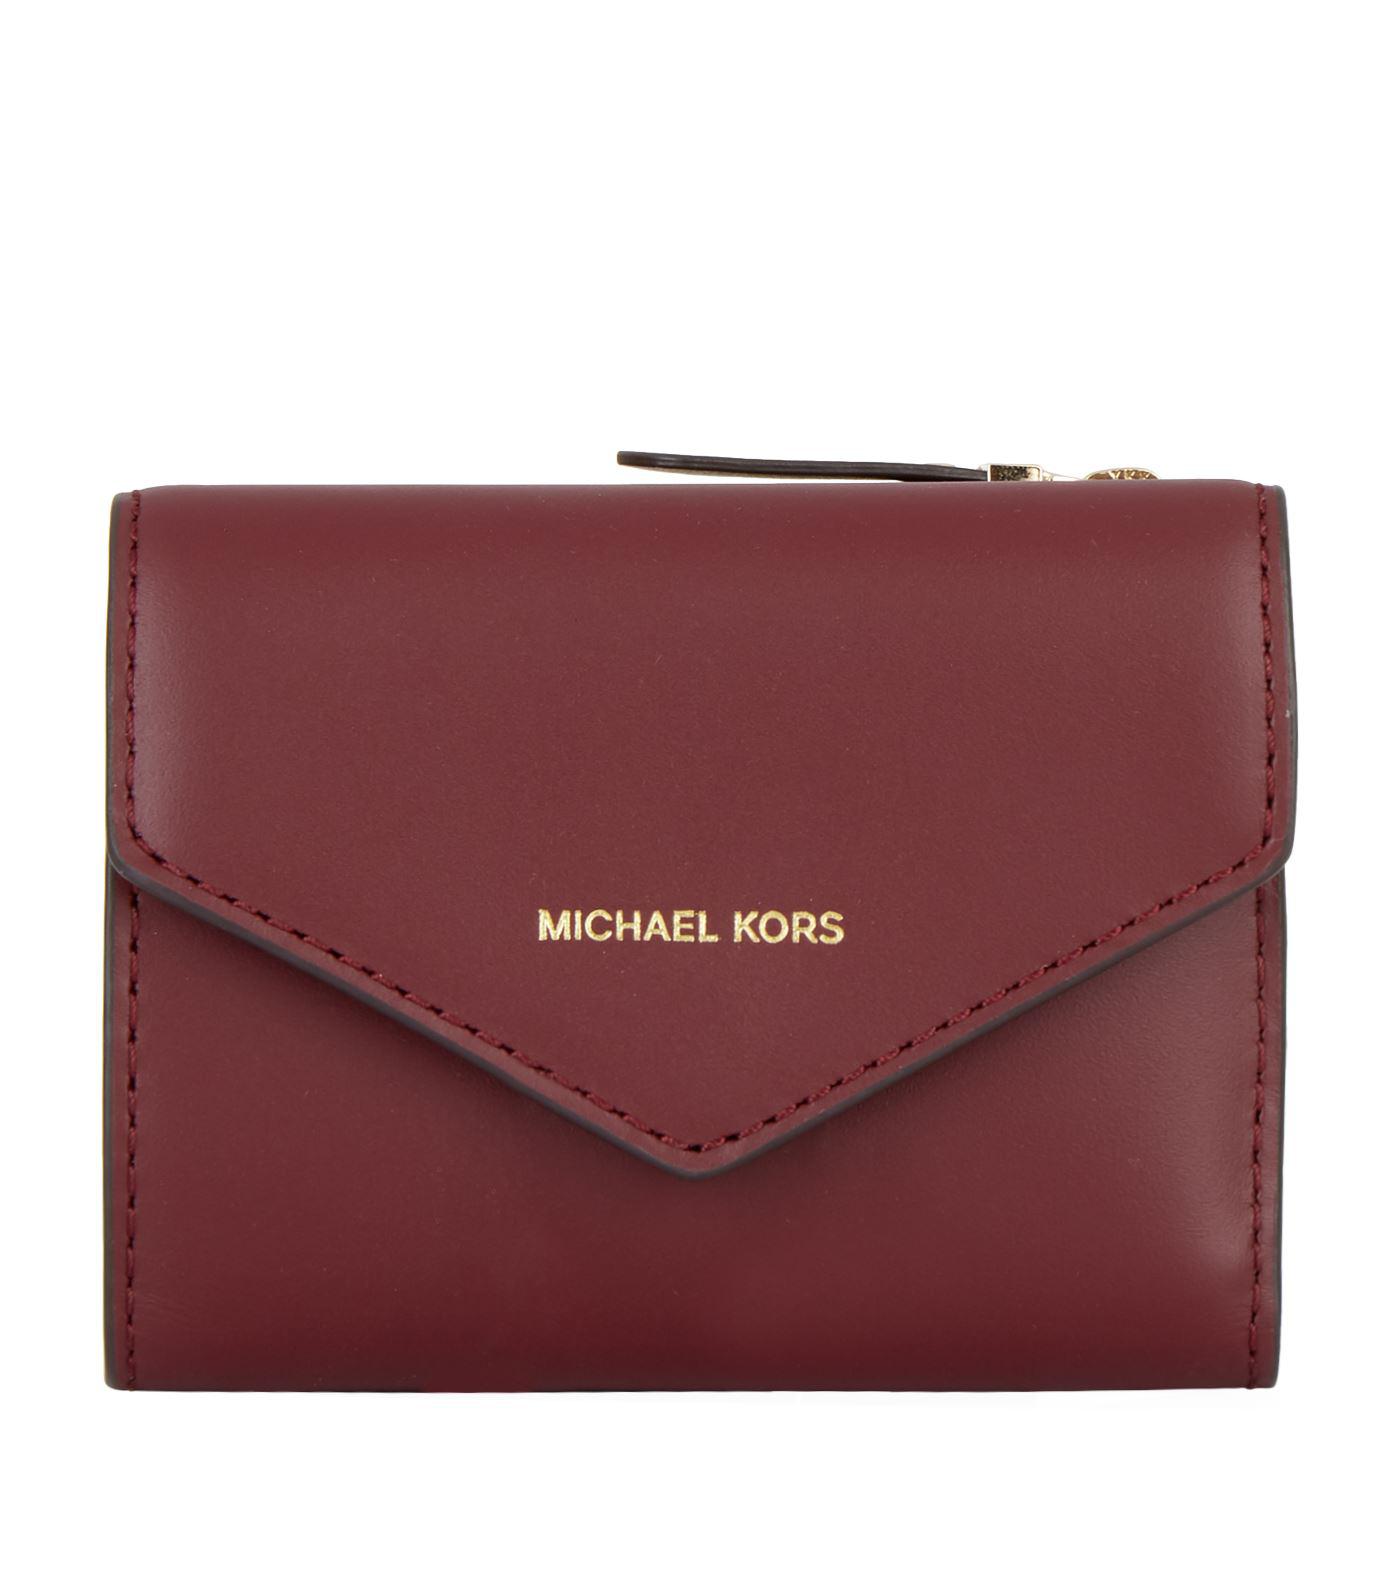 MICHAEL Michael Kors Small Leather Jet Set Envelope Wallet in Red - Lyst